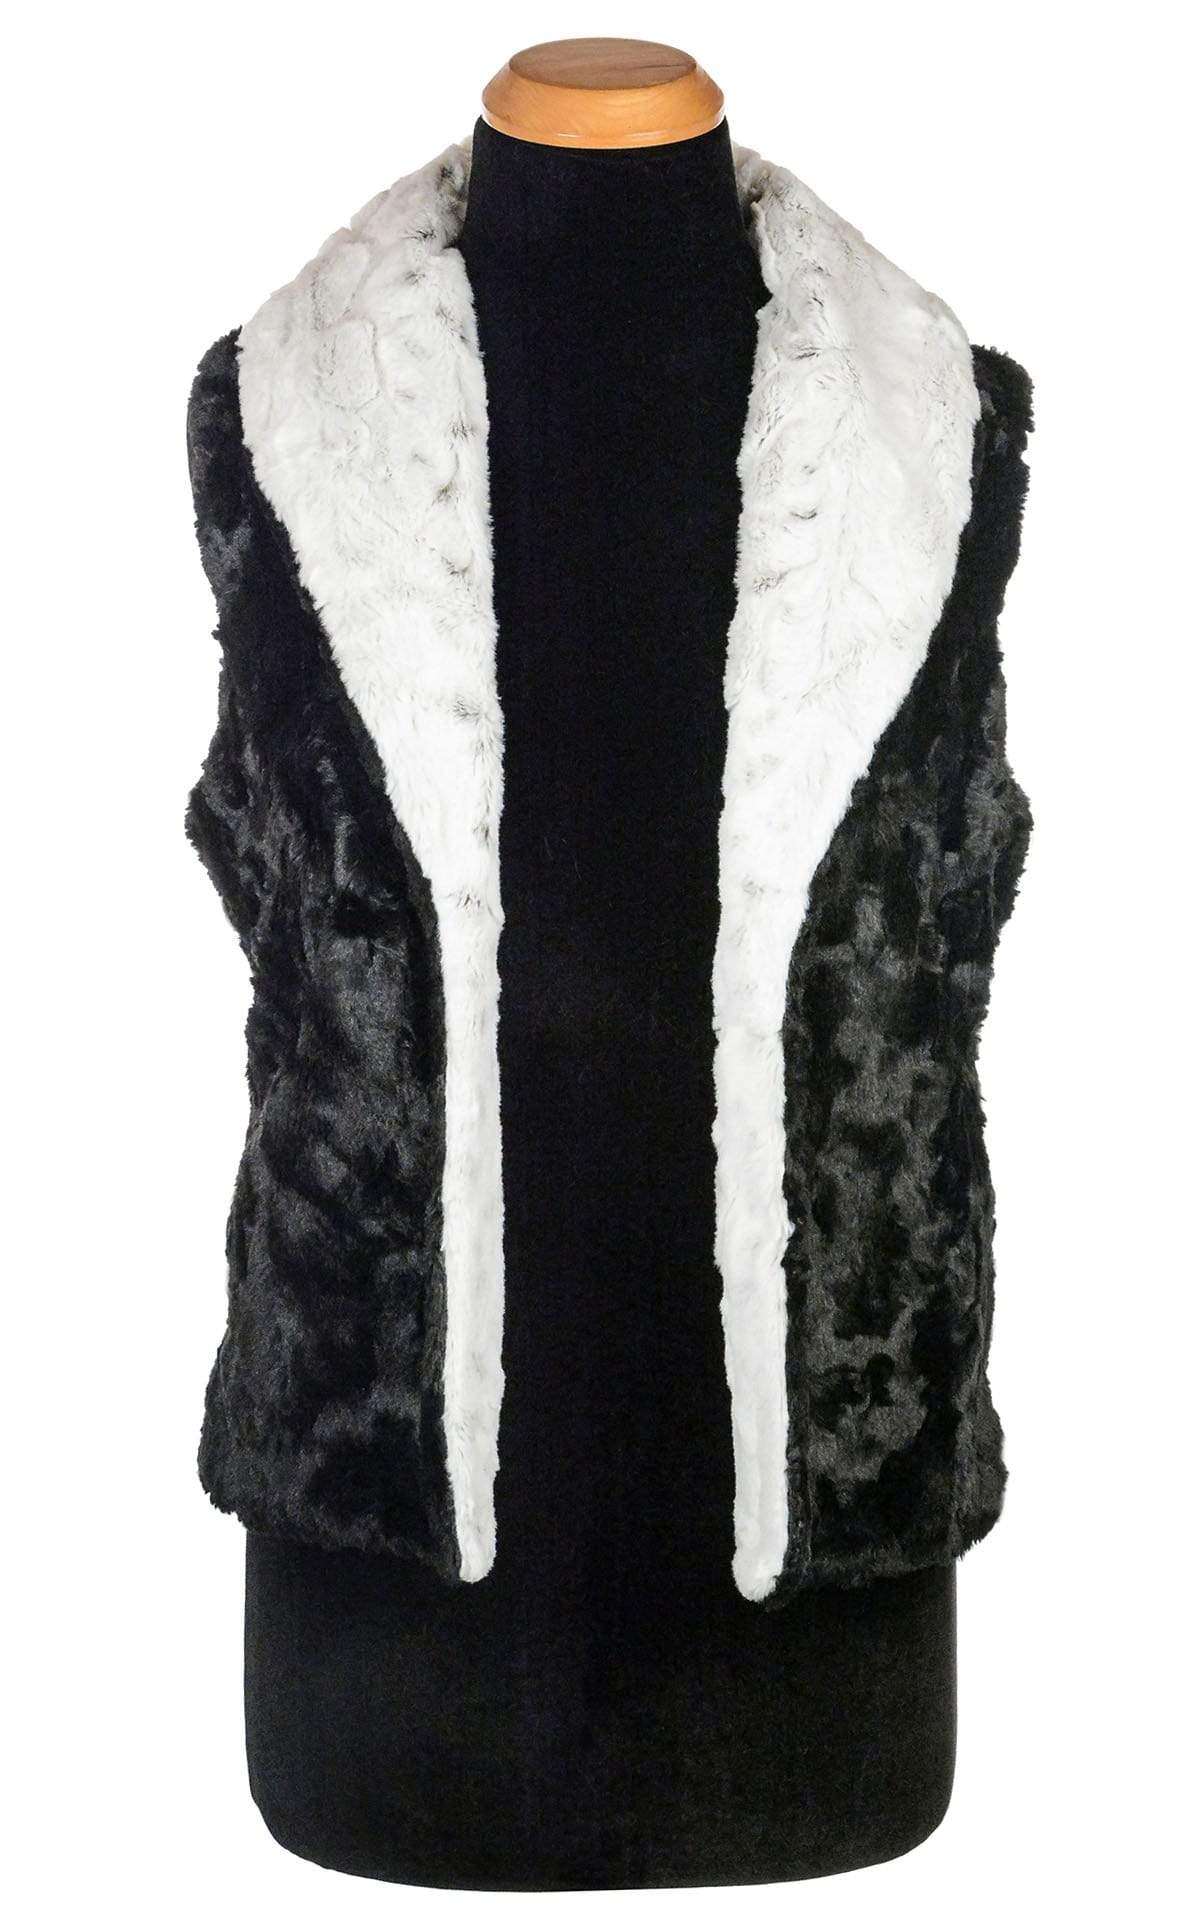 Shawl Collar Vest - Luxury Faux Fur in Winters Frost with Cuddly Fur in Black